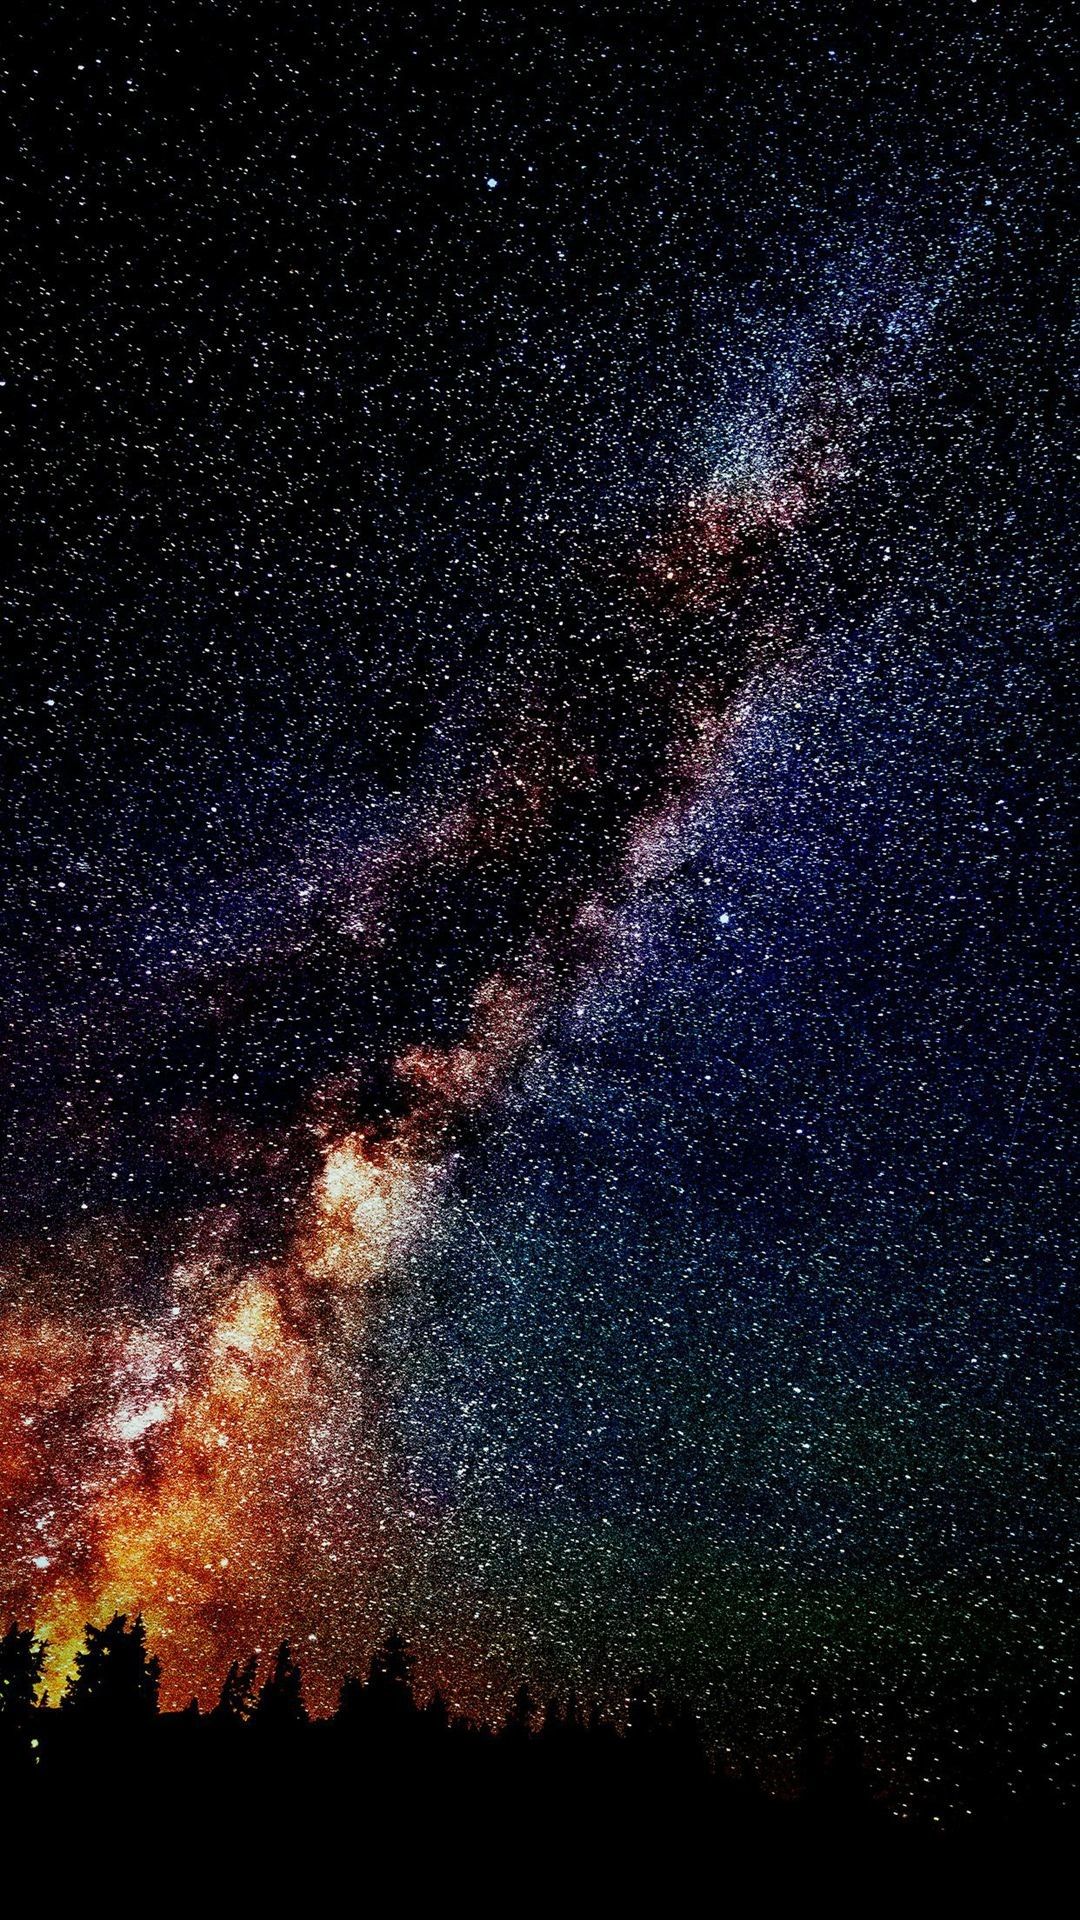 The Night Sky Wallpapers